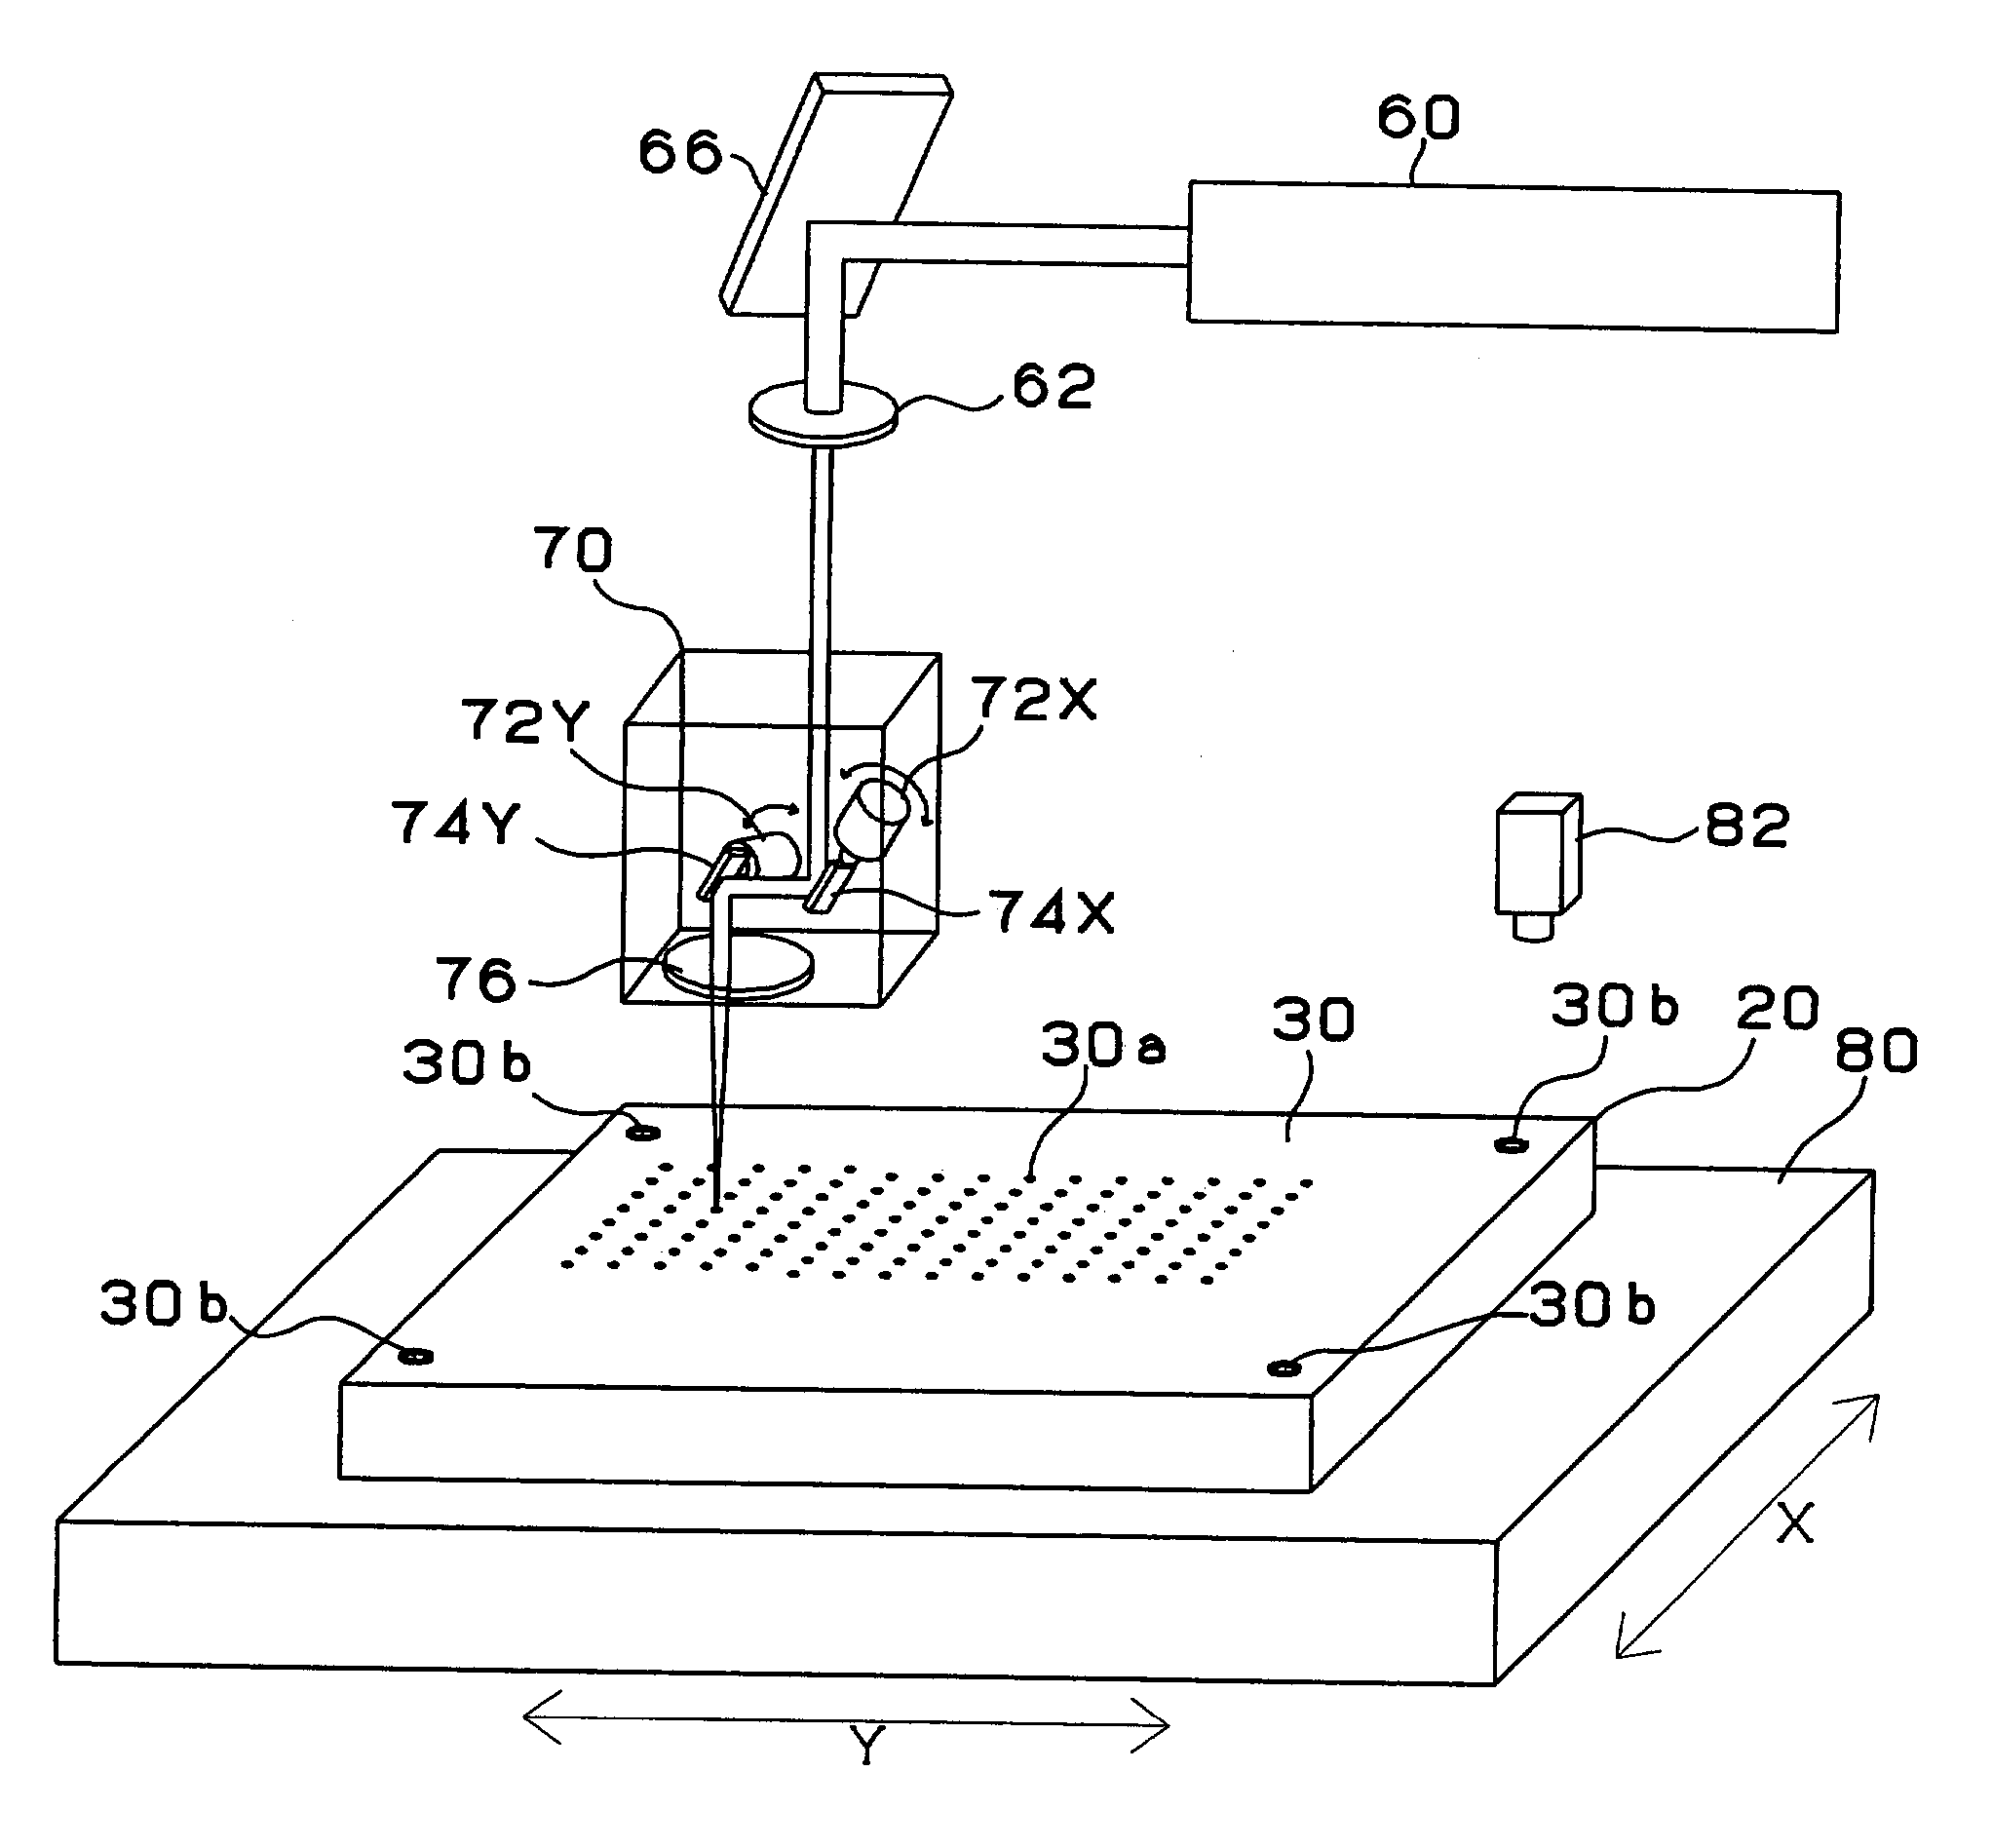 Process for producing a multi-layer printed wiring board